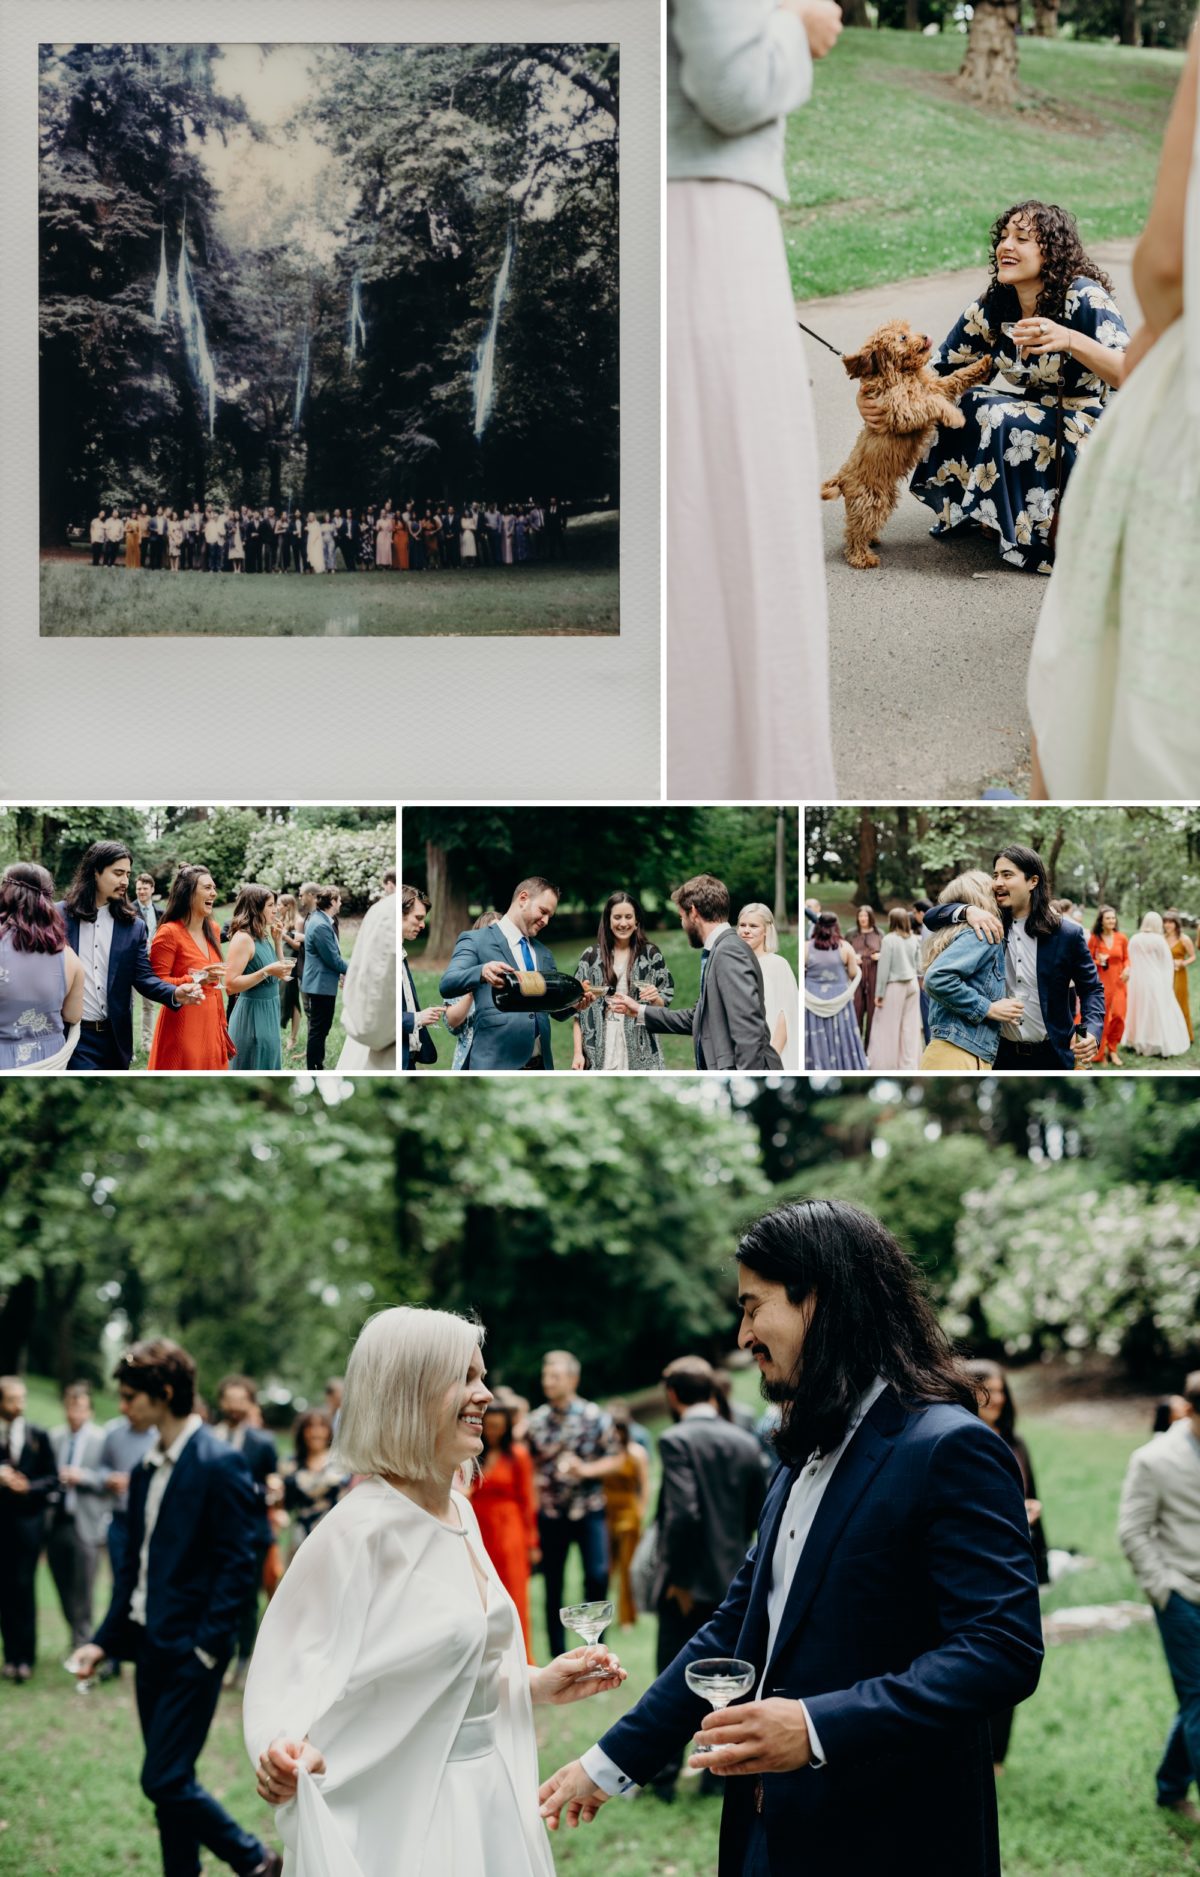 Champagne and friends in Laurelhurst Park. Photos by Portland Wedding photographer Briana Morrison